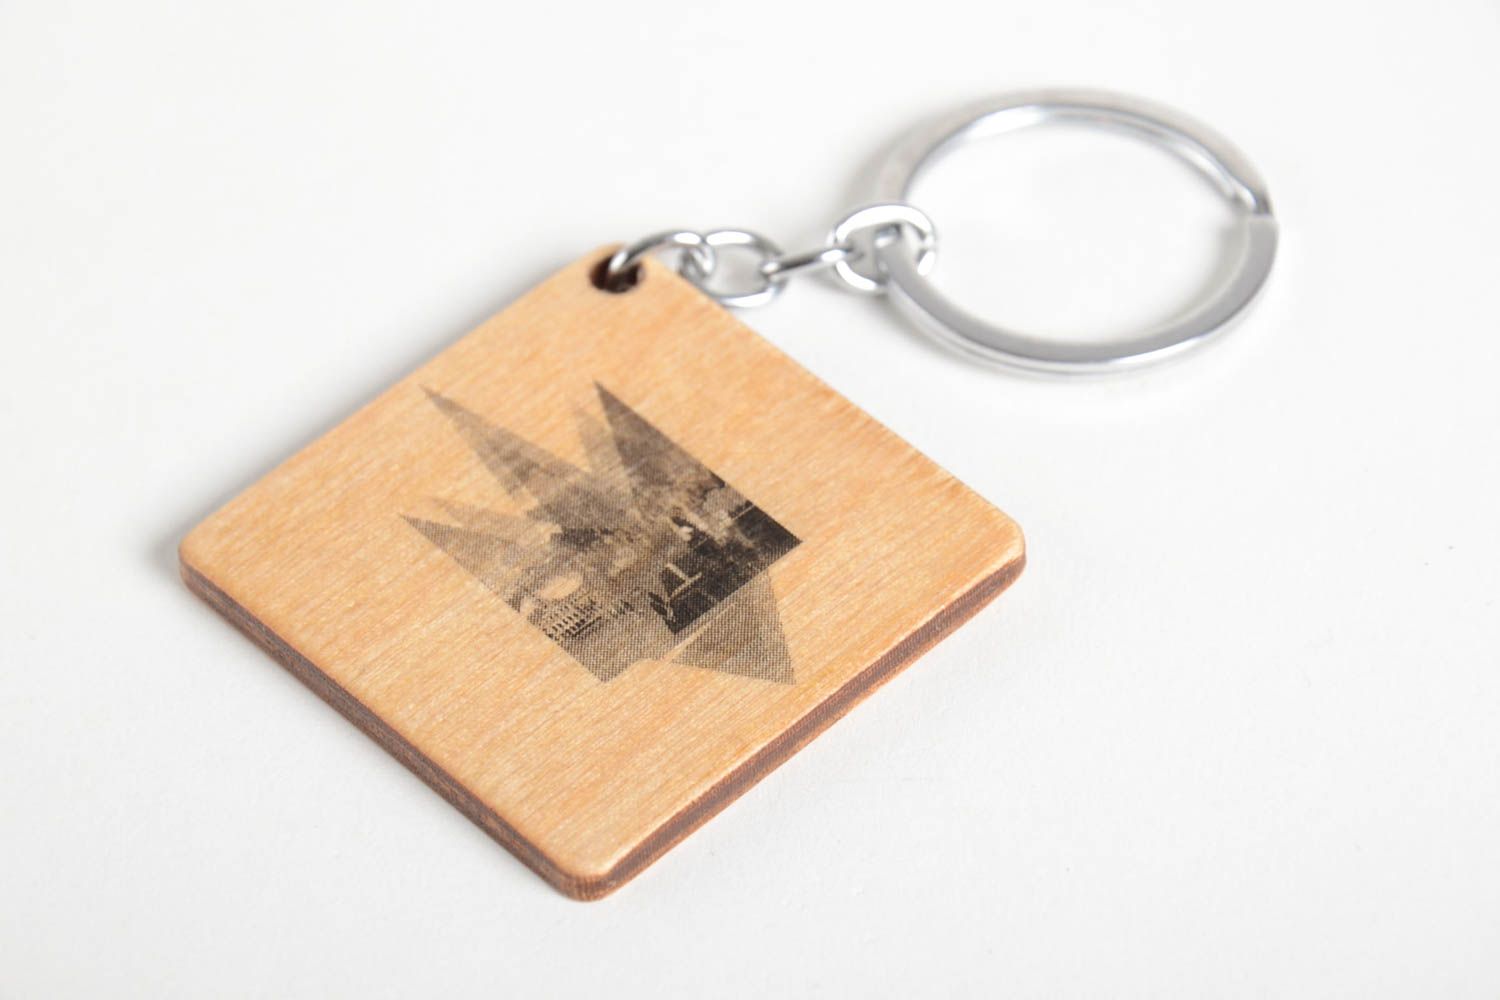 Homemade wooden keychain designer accessories key ring souvenir ideas cool gifts photo 5